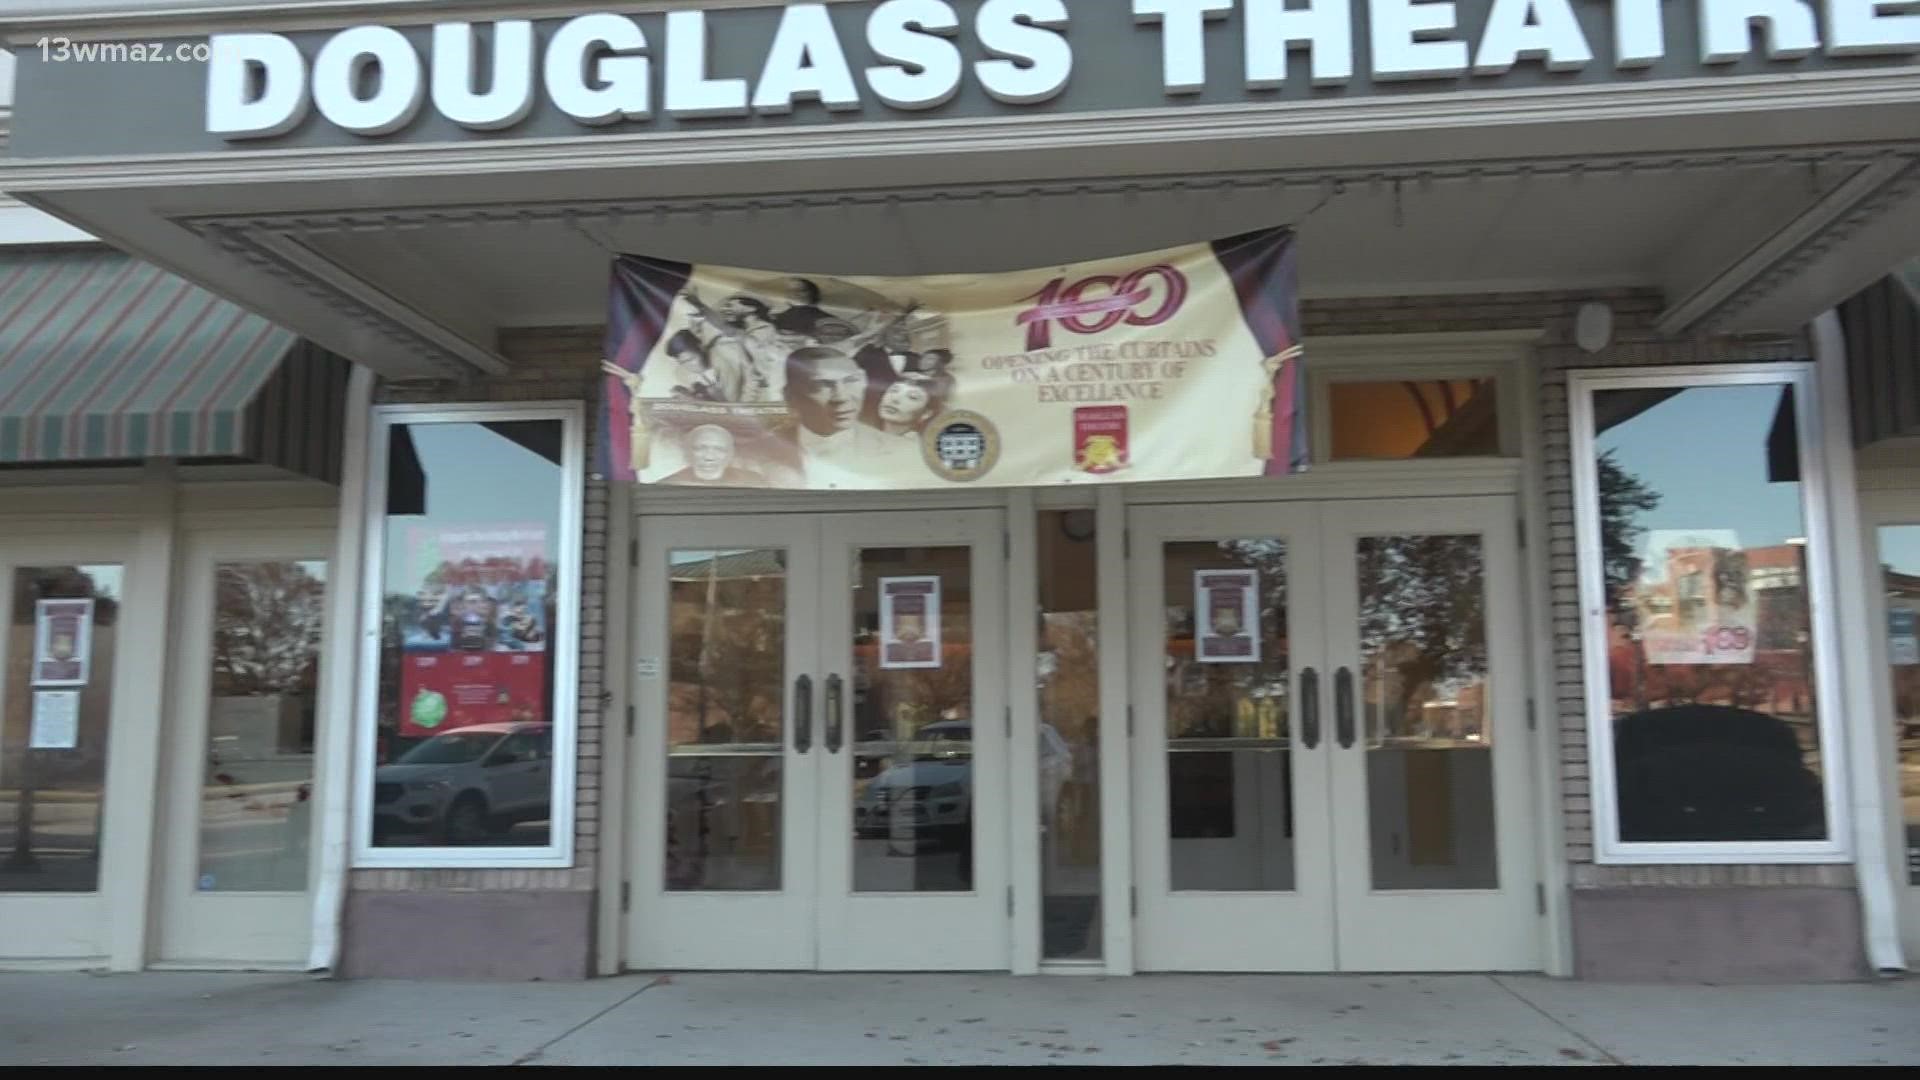 The Douglass hosted icons like Little Richard, Otis Redding and James Brown in their early days.